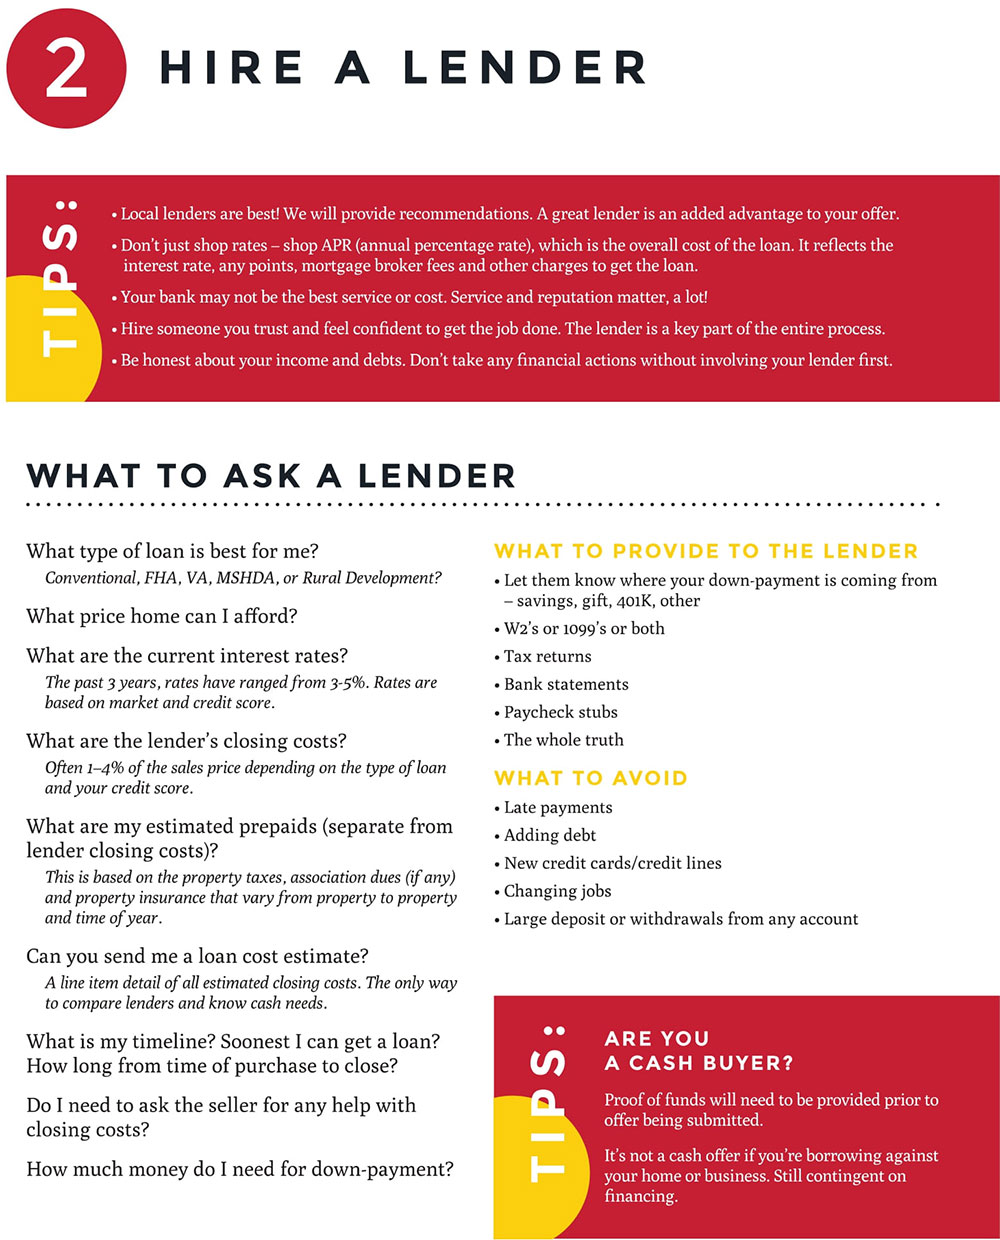 Mortgages-&-Lenders-1(cropped)